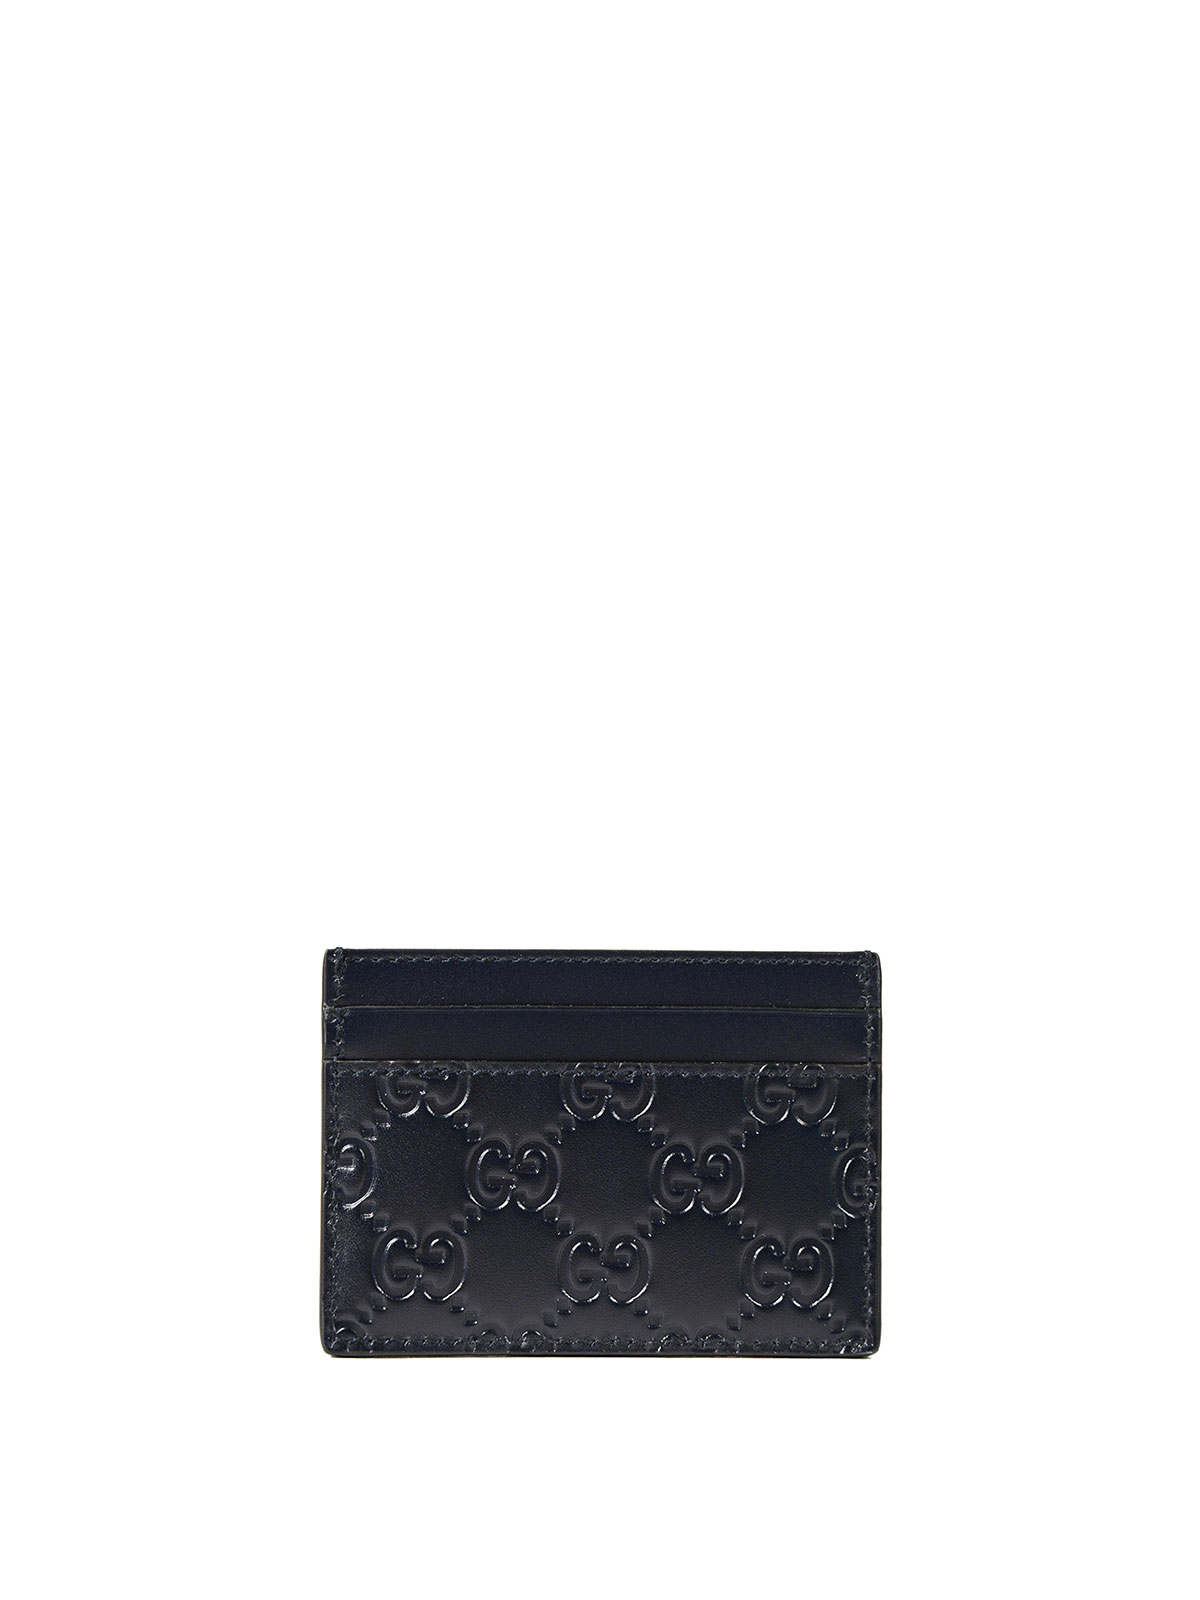 Mens Gucci Wallets, Leather Wallets & Card Holders